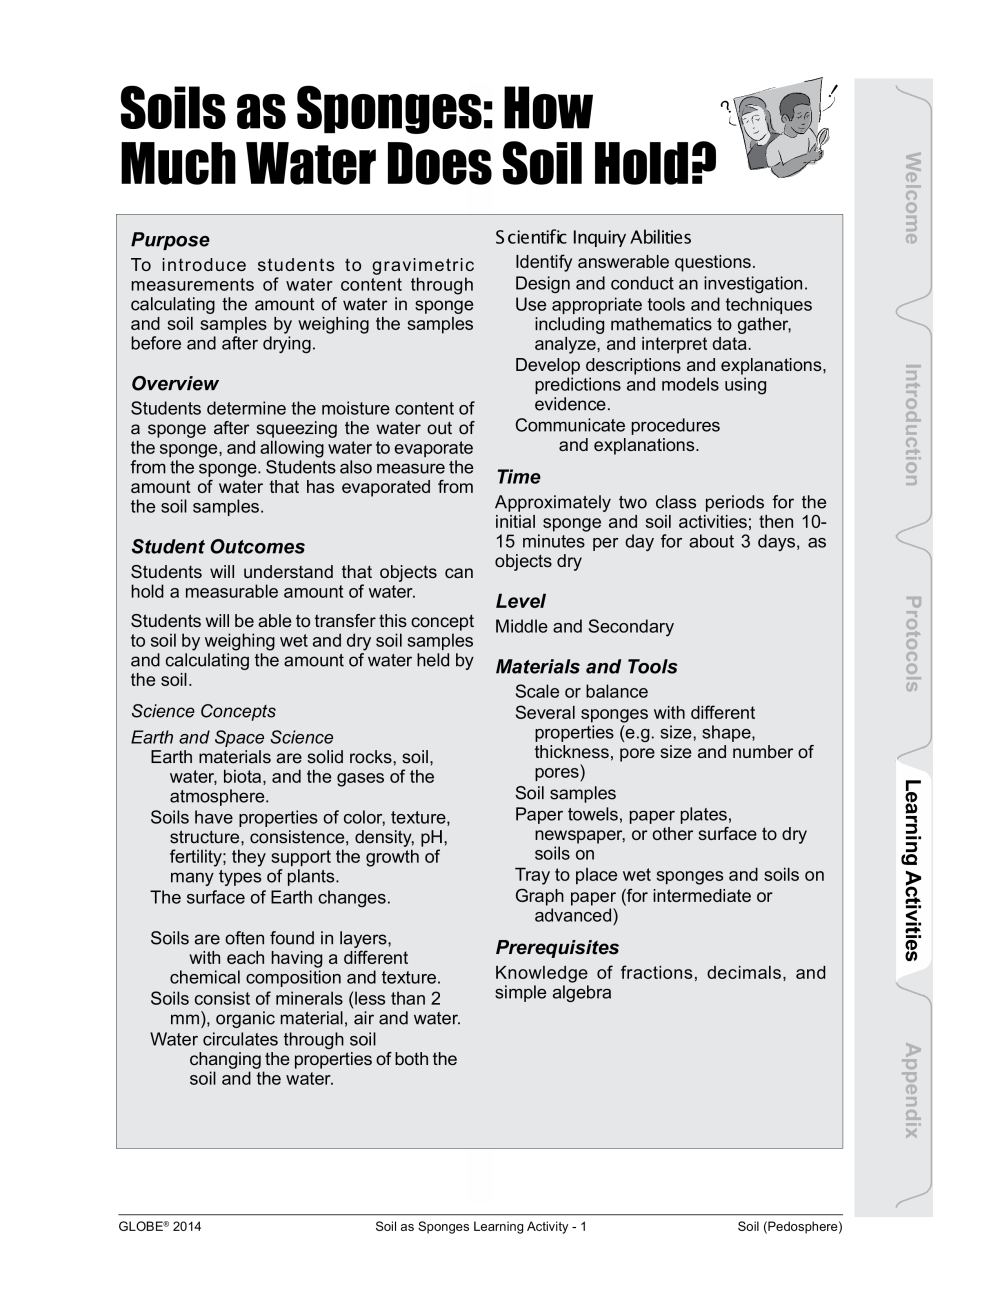 Learning Activities preview for Soils as Sponges- How Much Water Does Soil Hold